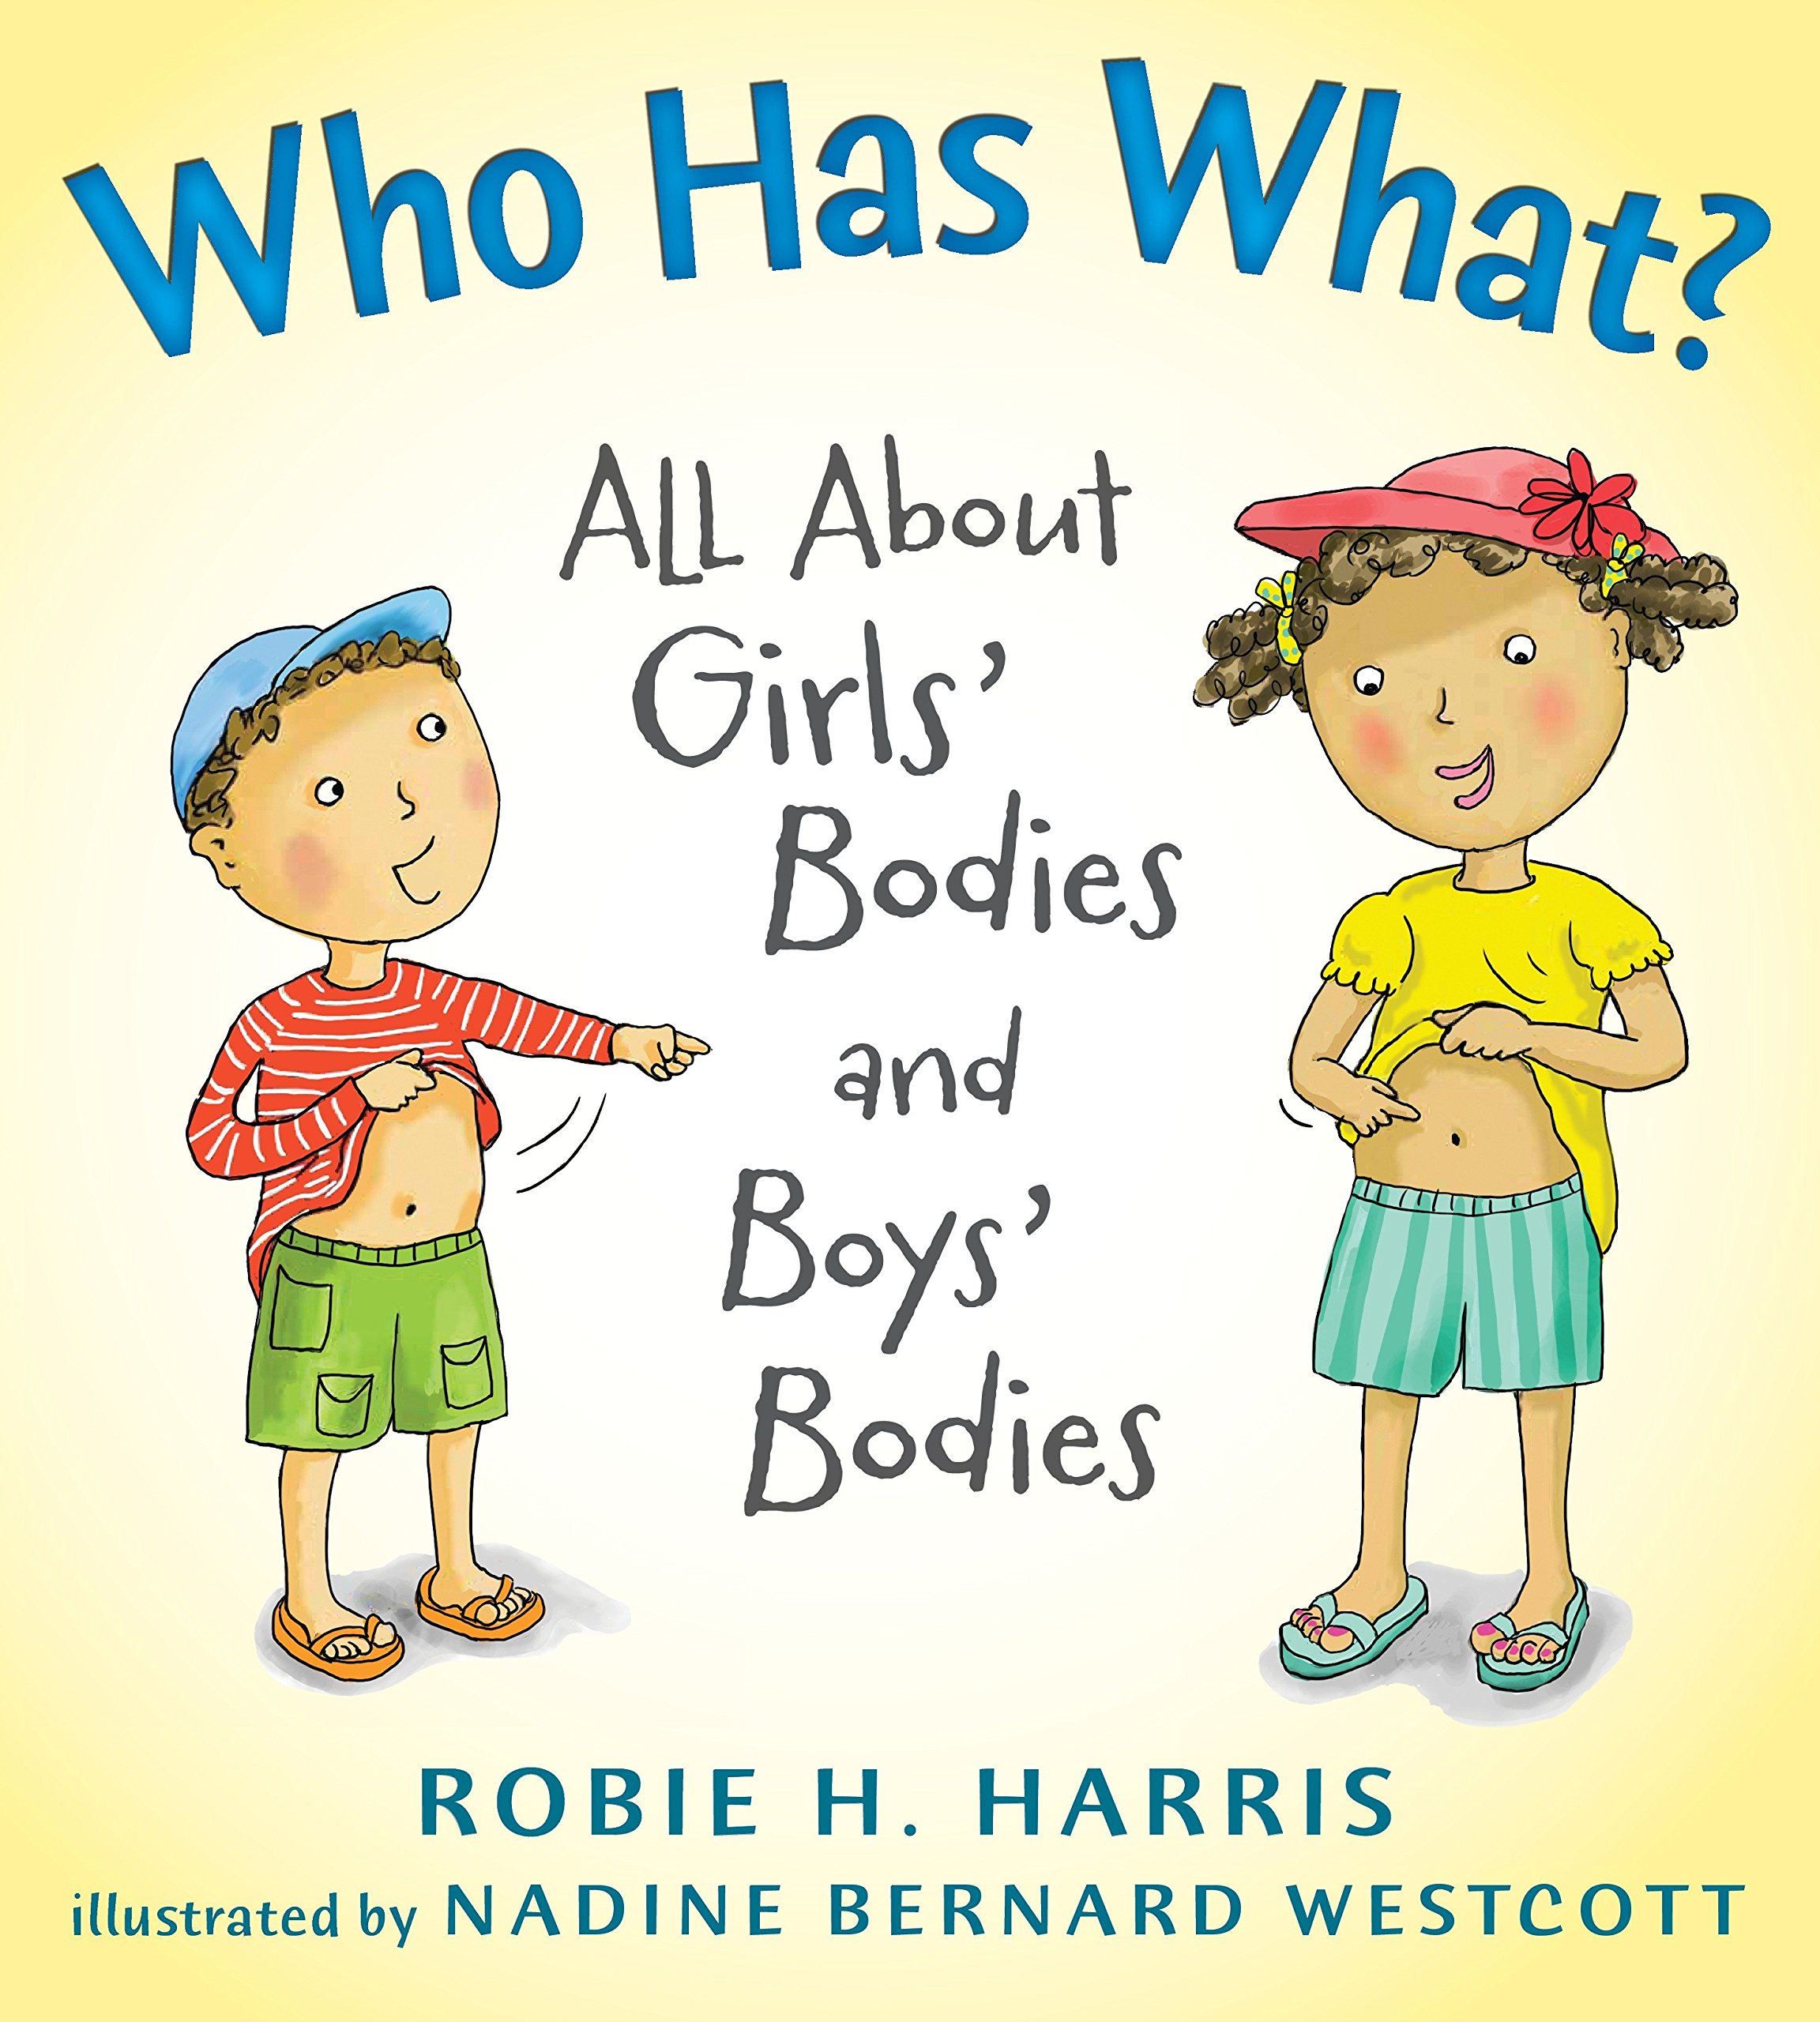 Who Has What? All about Girls' Bodies and Boys' Bodies